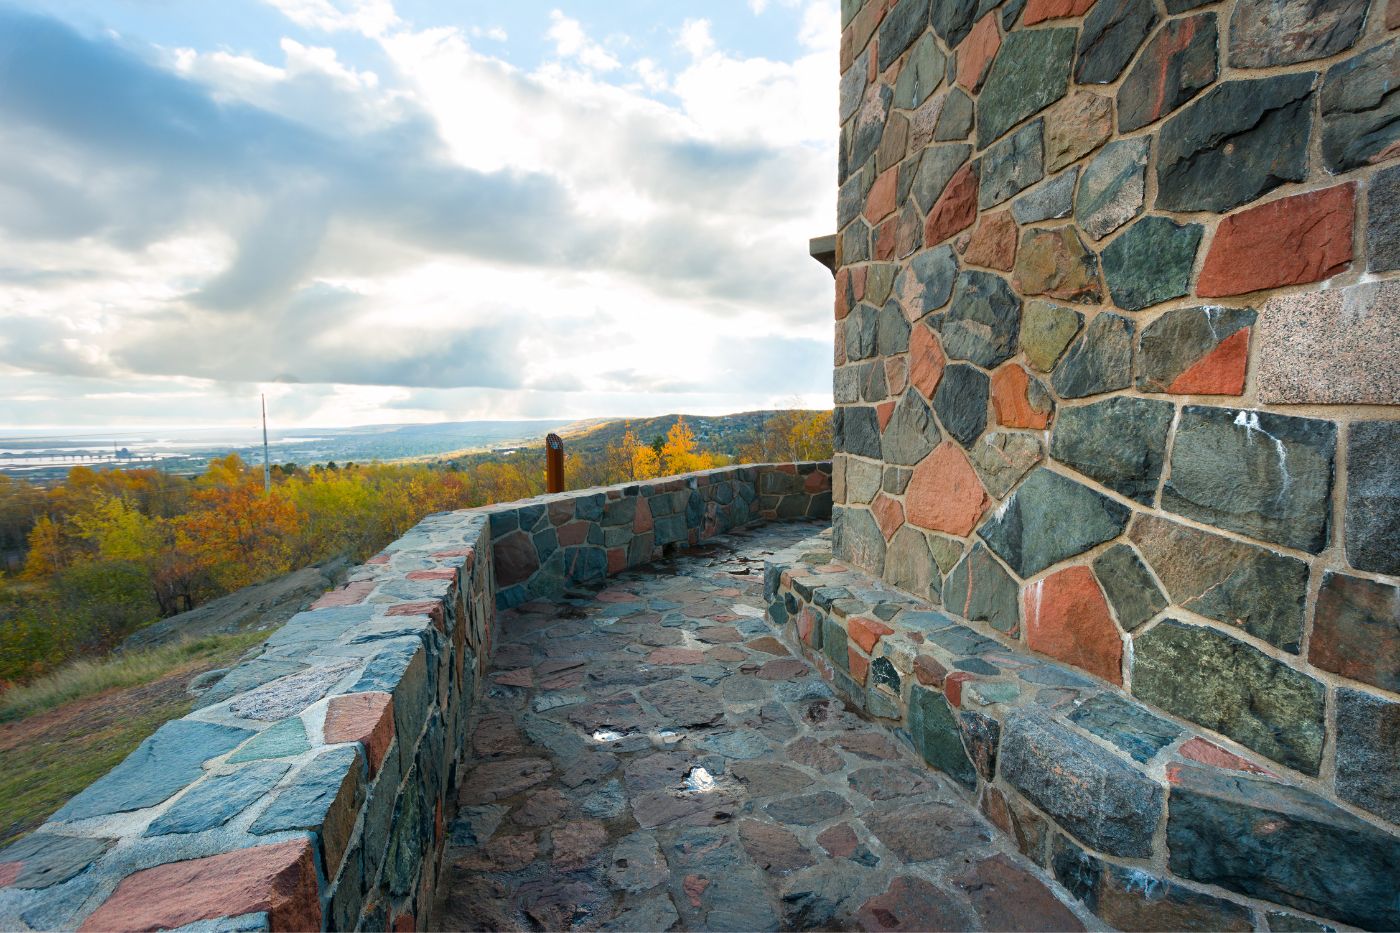 Enger Tower Walkway - Fun Places to Visit in Duluth MN